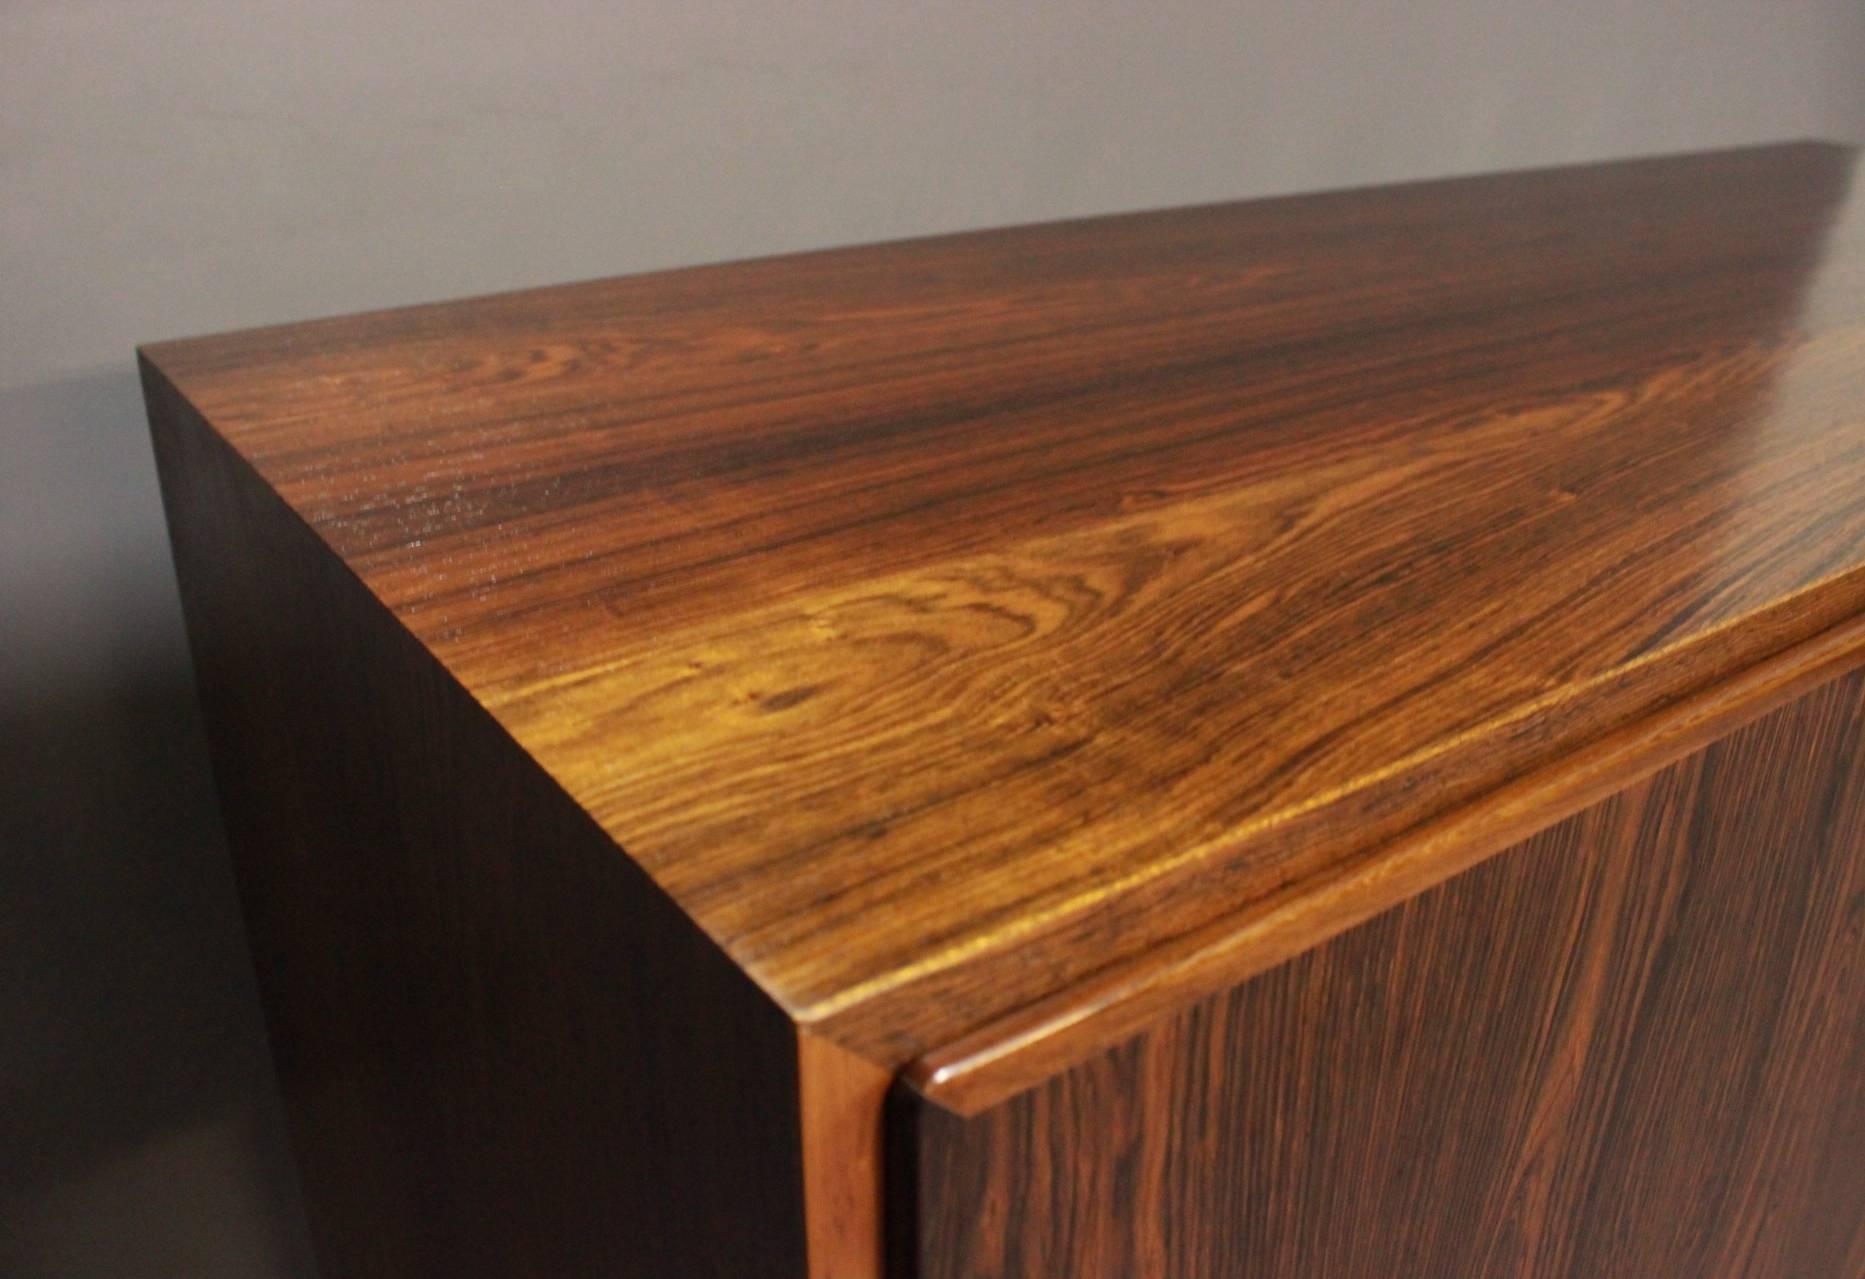 Scandinavian Modern Sideboard in Rosewood by Poul Hundevad and Hundevad Furniture, 1960s